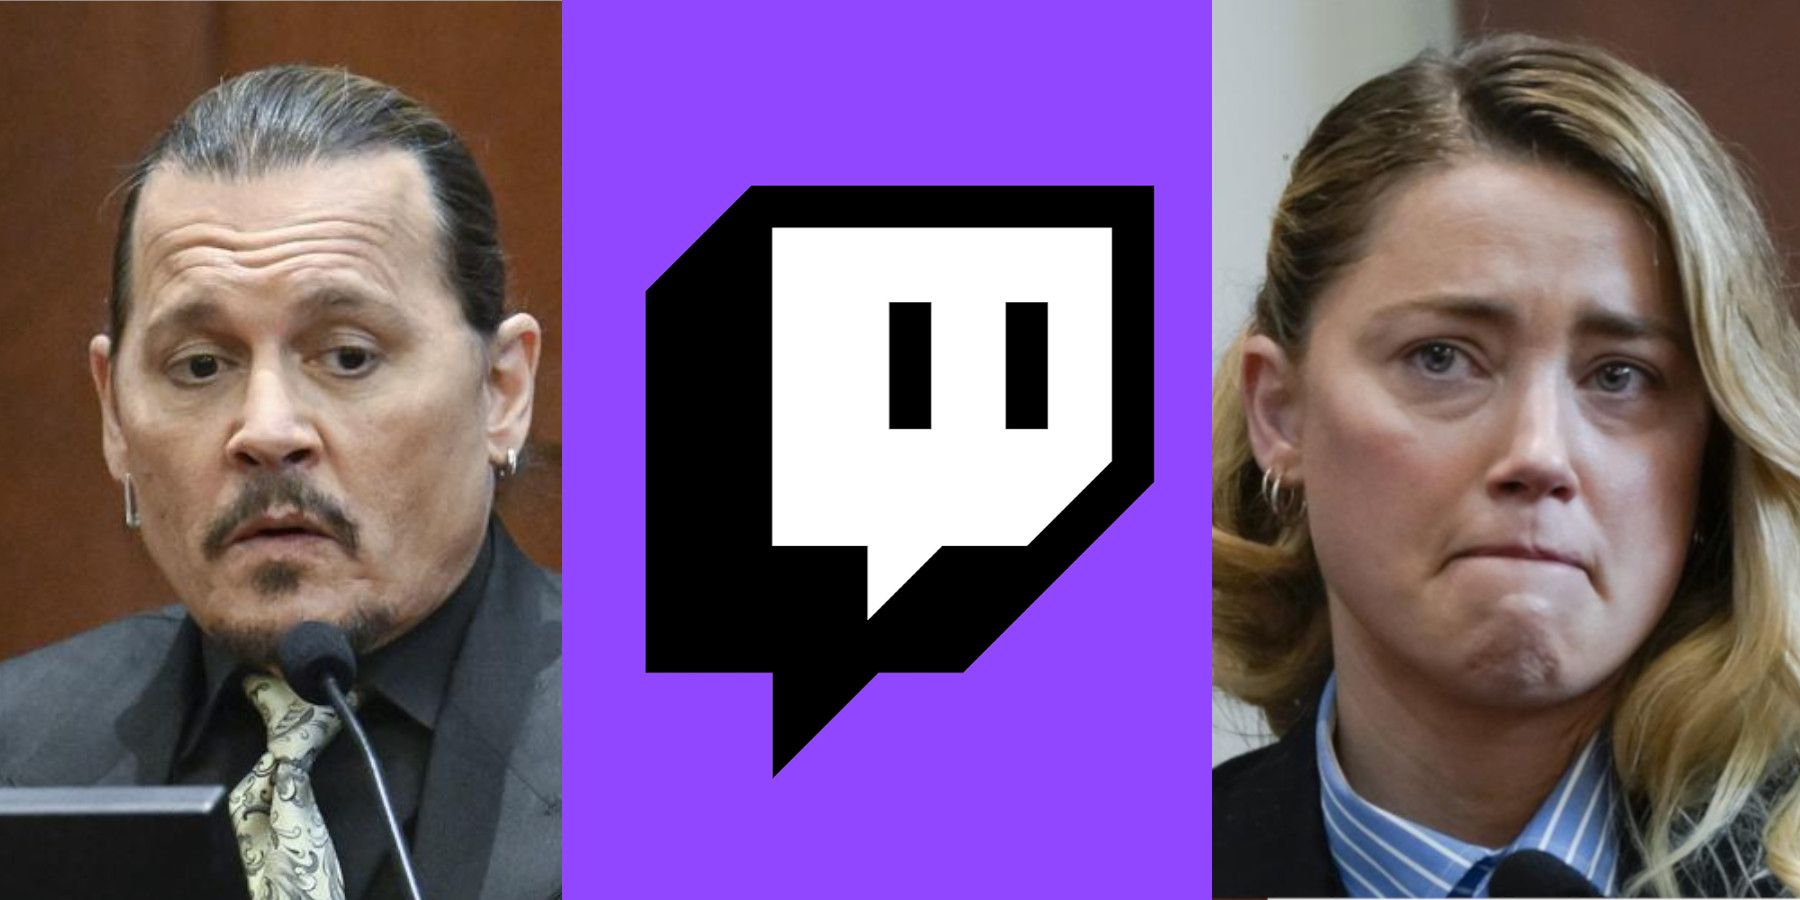 On the left, Johnny Depp behind a courtroom microphone. In the middle, Twitch's Glitch mascot, an angular word bubble whose eyes are two vertical, black lines. On the right, Amber Heard testifying to court.